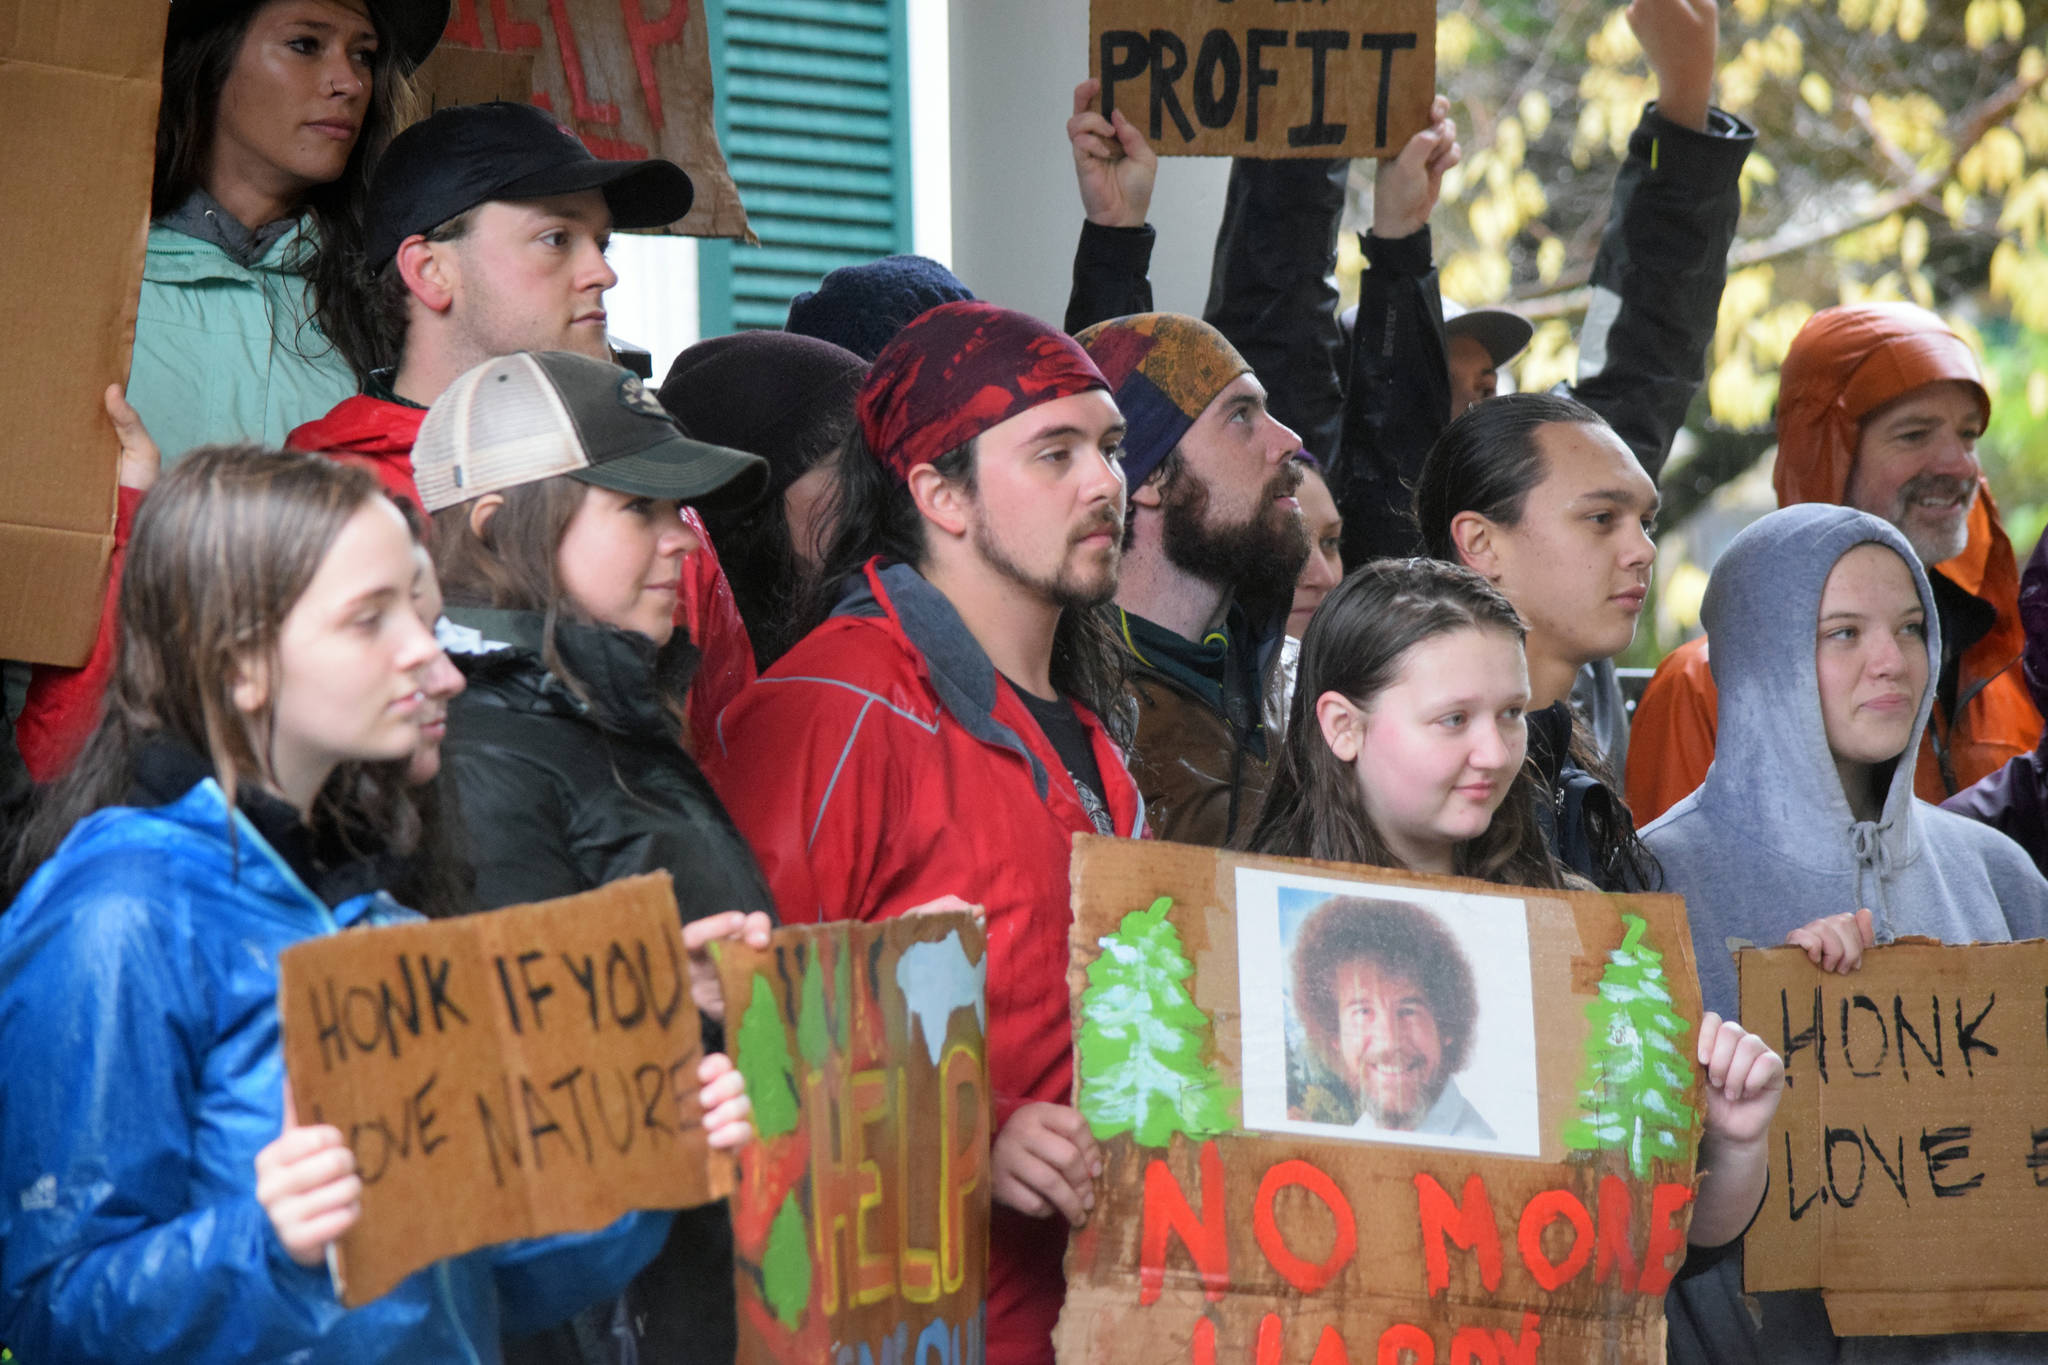 50 protesters march in Juneau as part of global climate strike